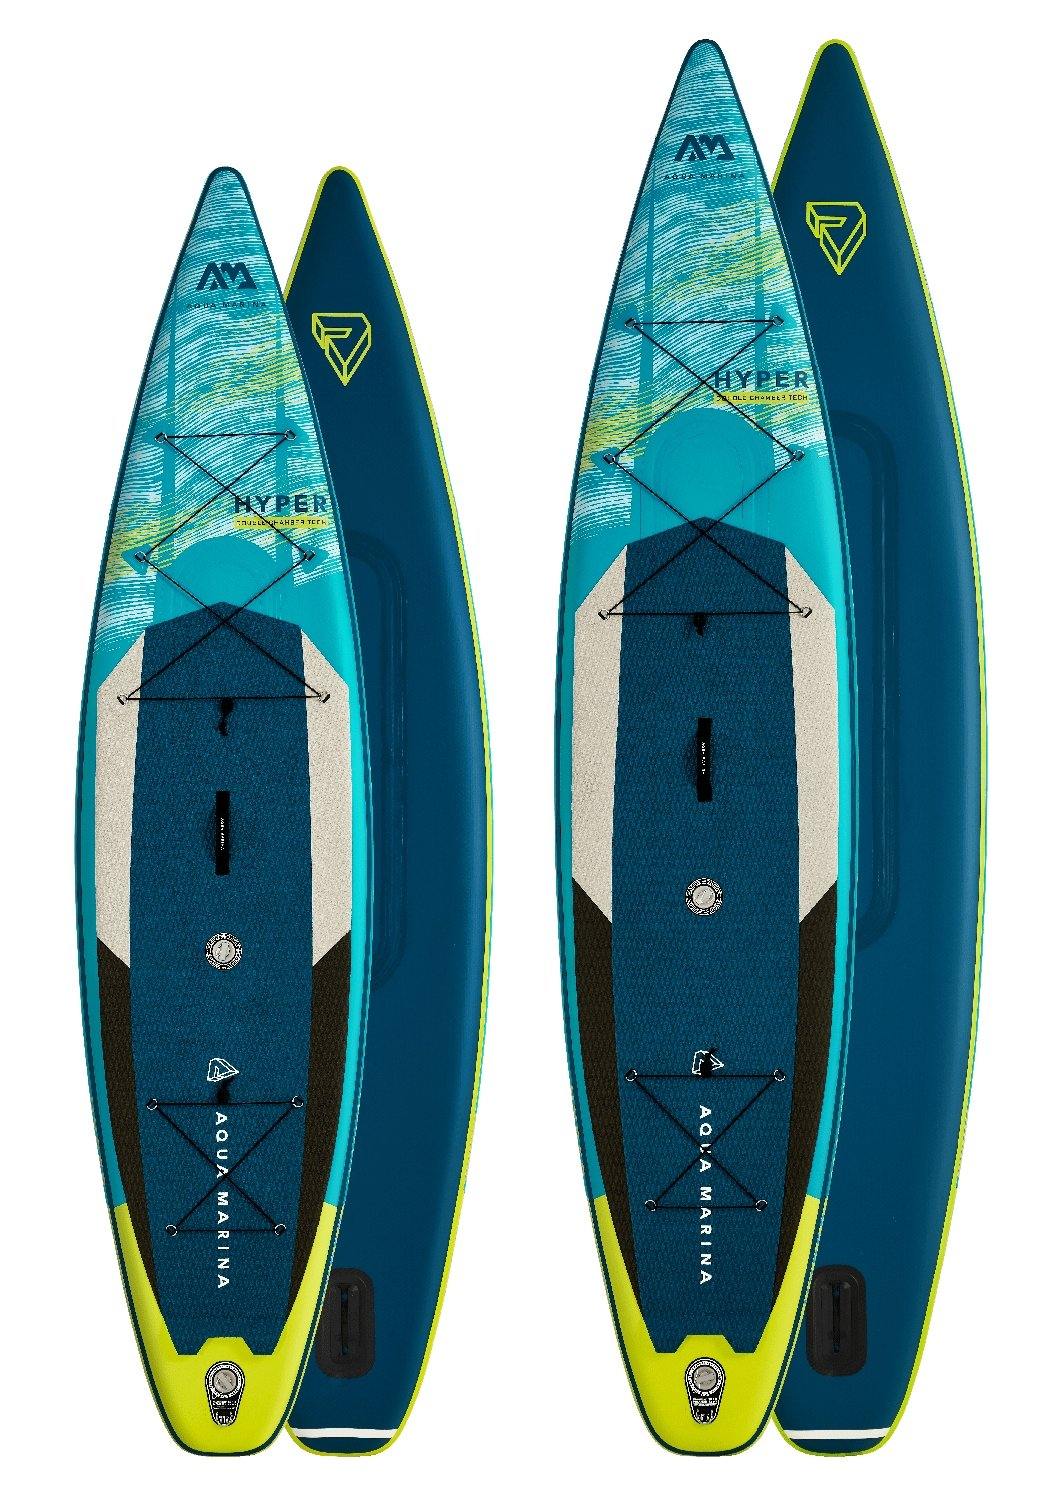 Hyper 11'6'' Touring iSUP Paddle Board - Dti Direct USA